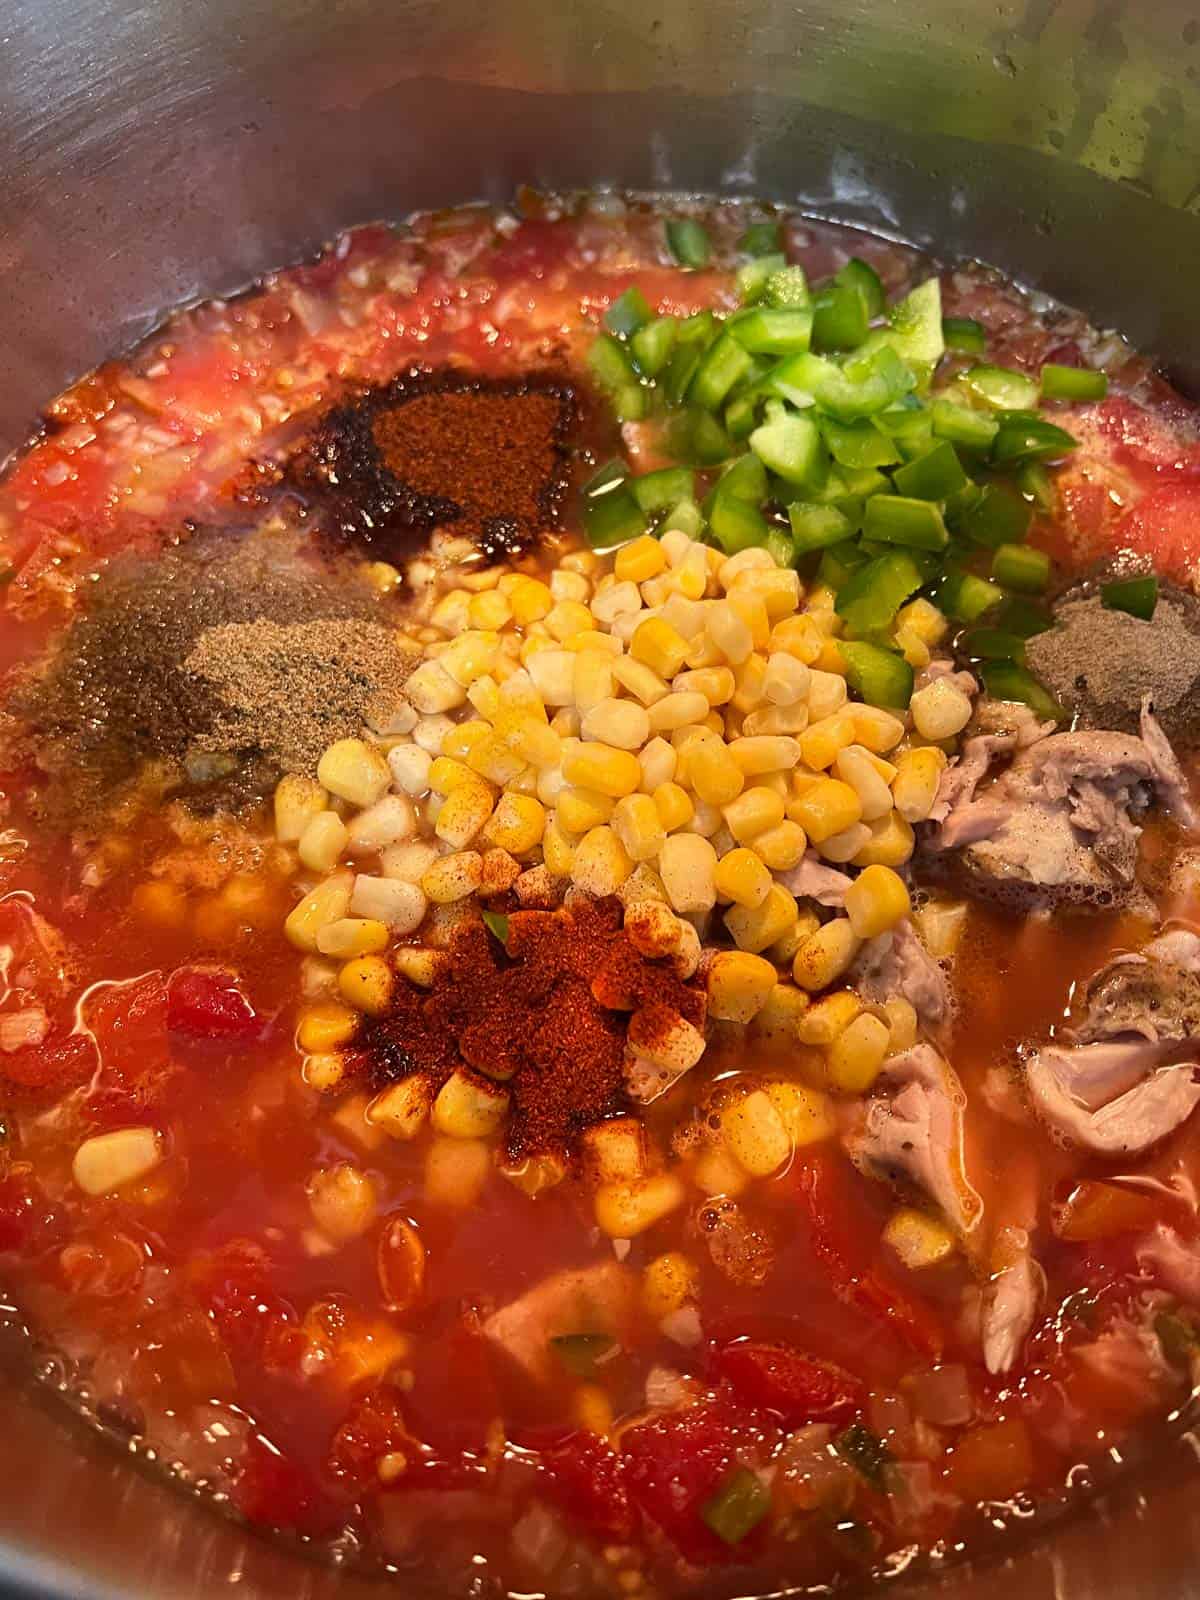 Adding remaining ingredients to the soup pot.